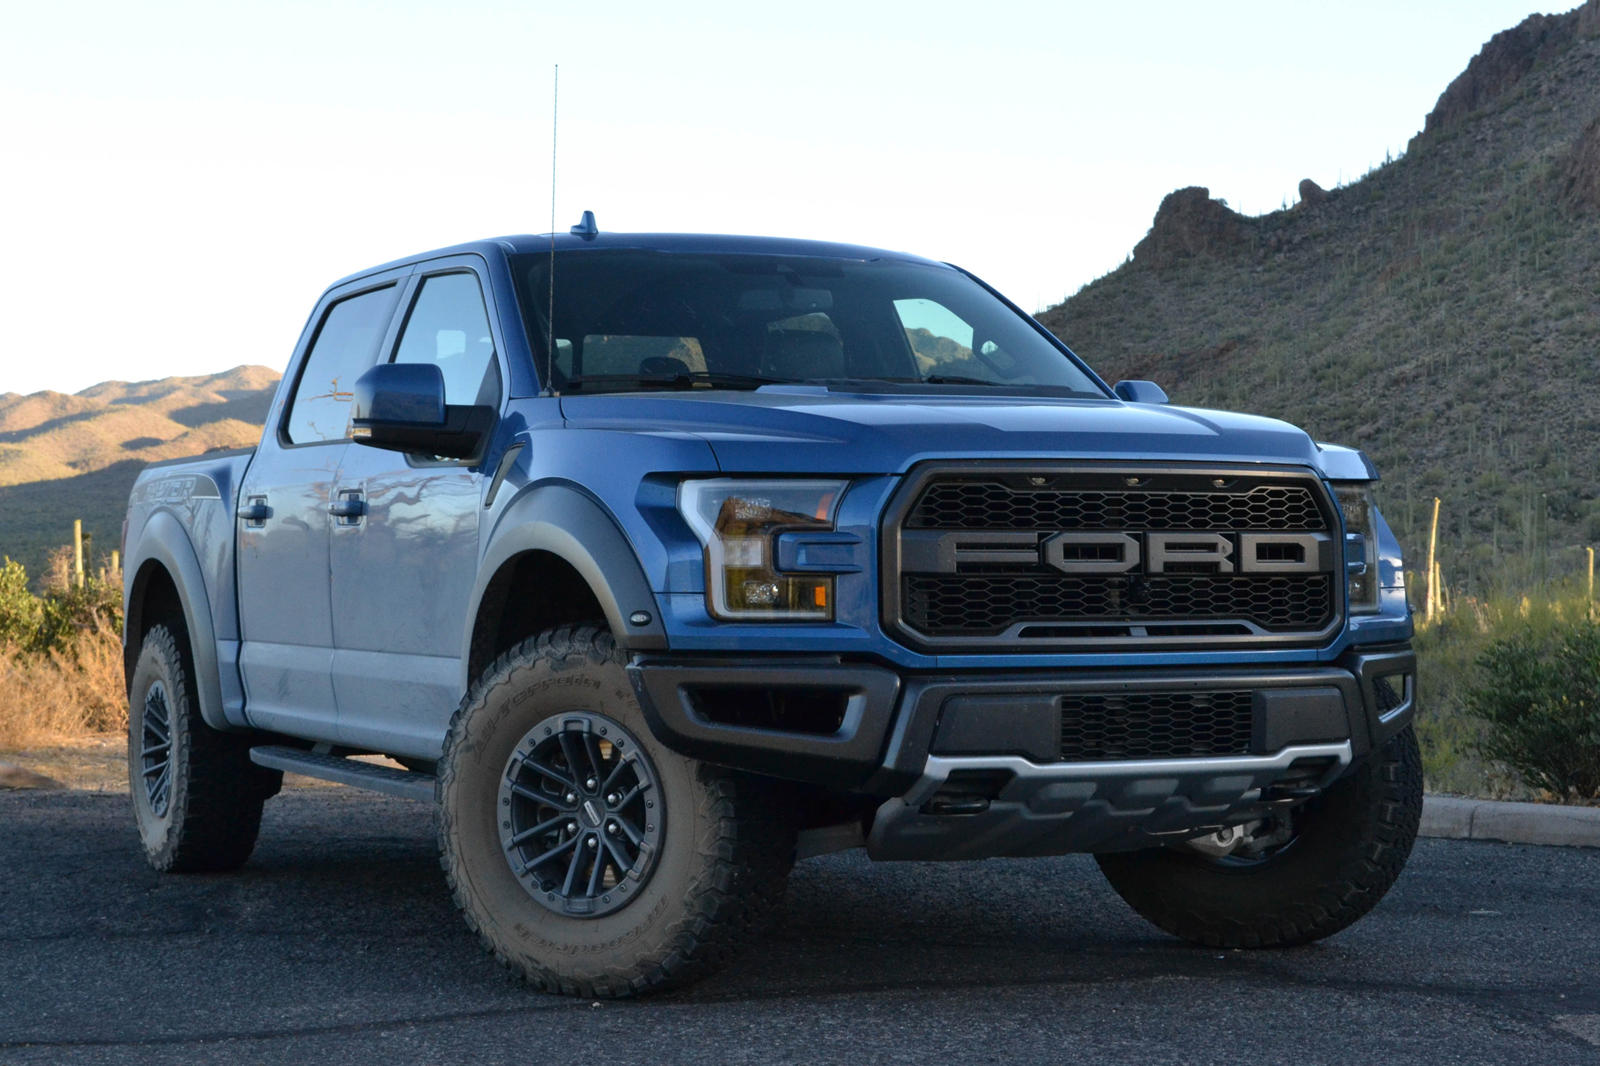 25 Great 2018 f 150 exterior dimensions Trend in This Years